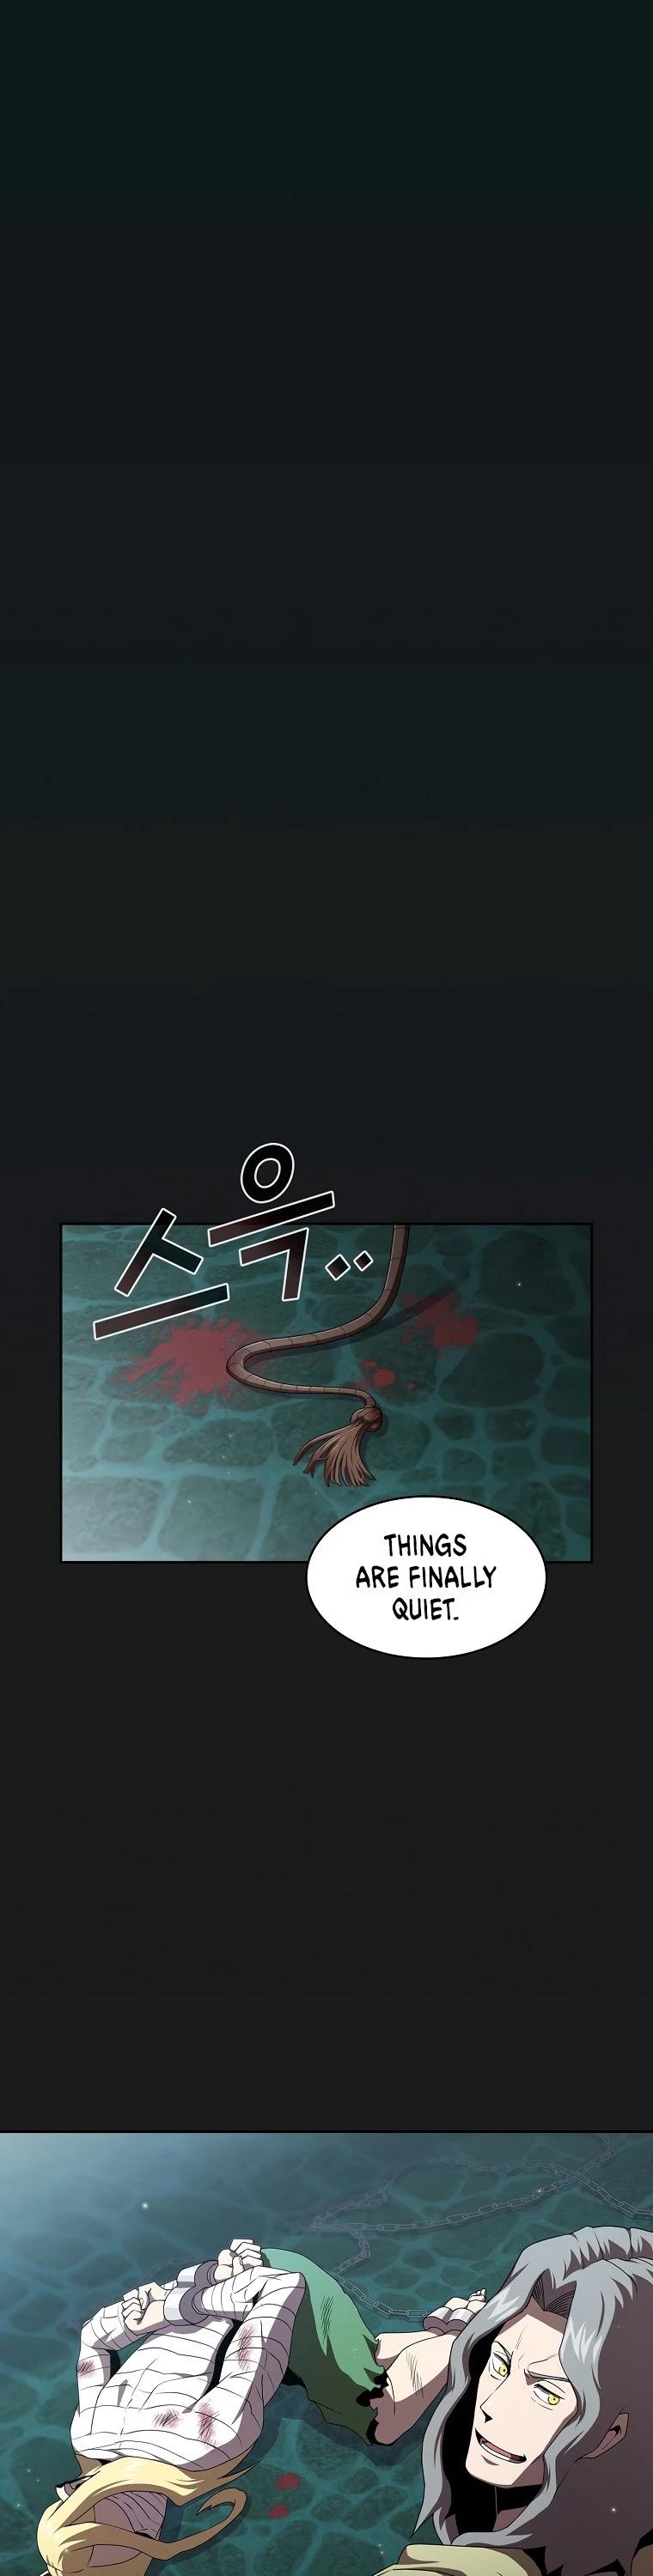 Is This Hero For Real? Chapter 11 page 11 - isthisheroforreal.com